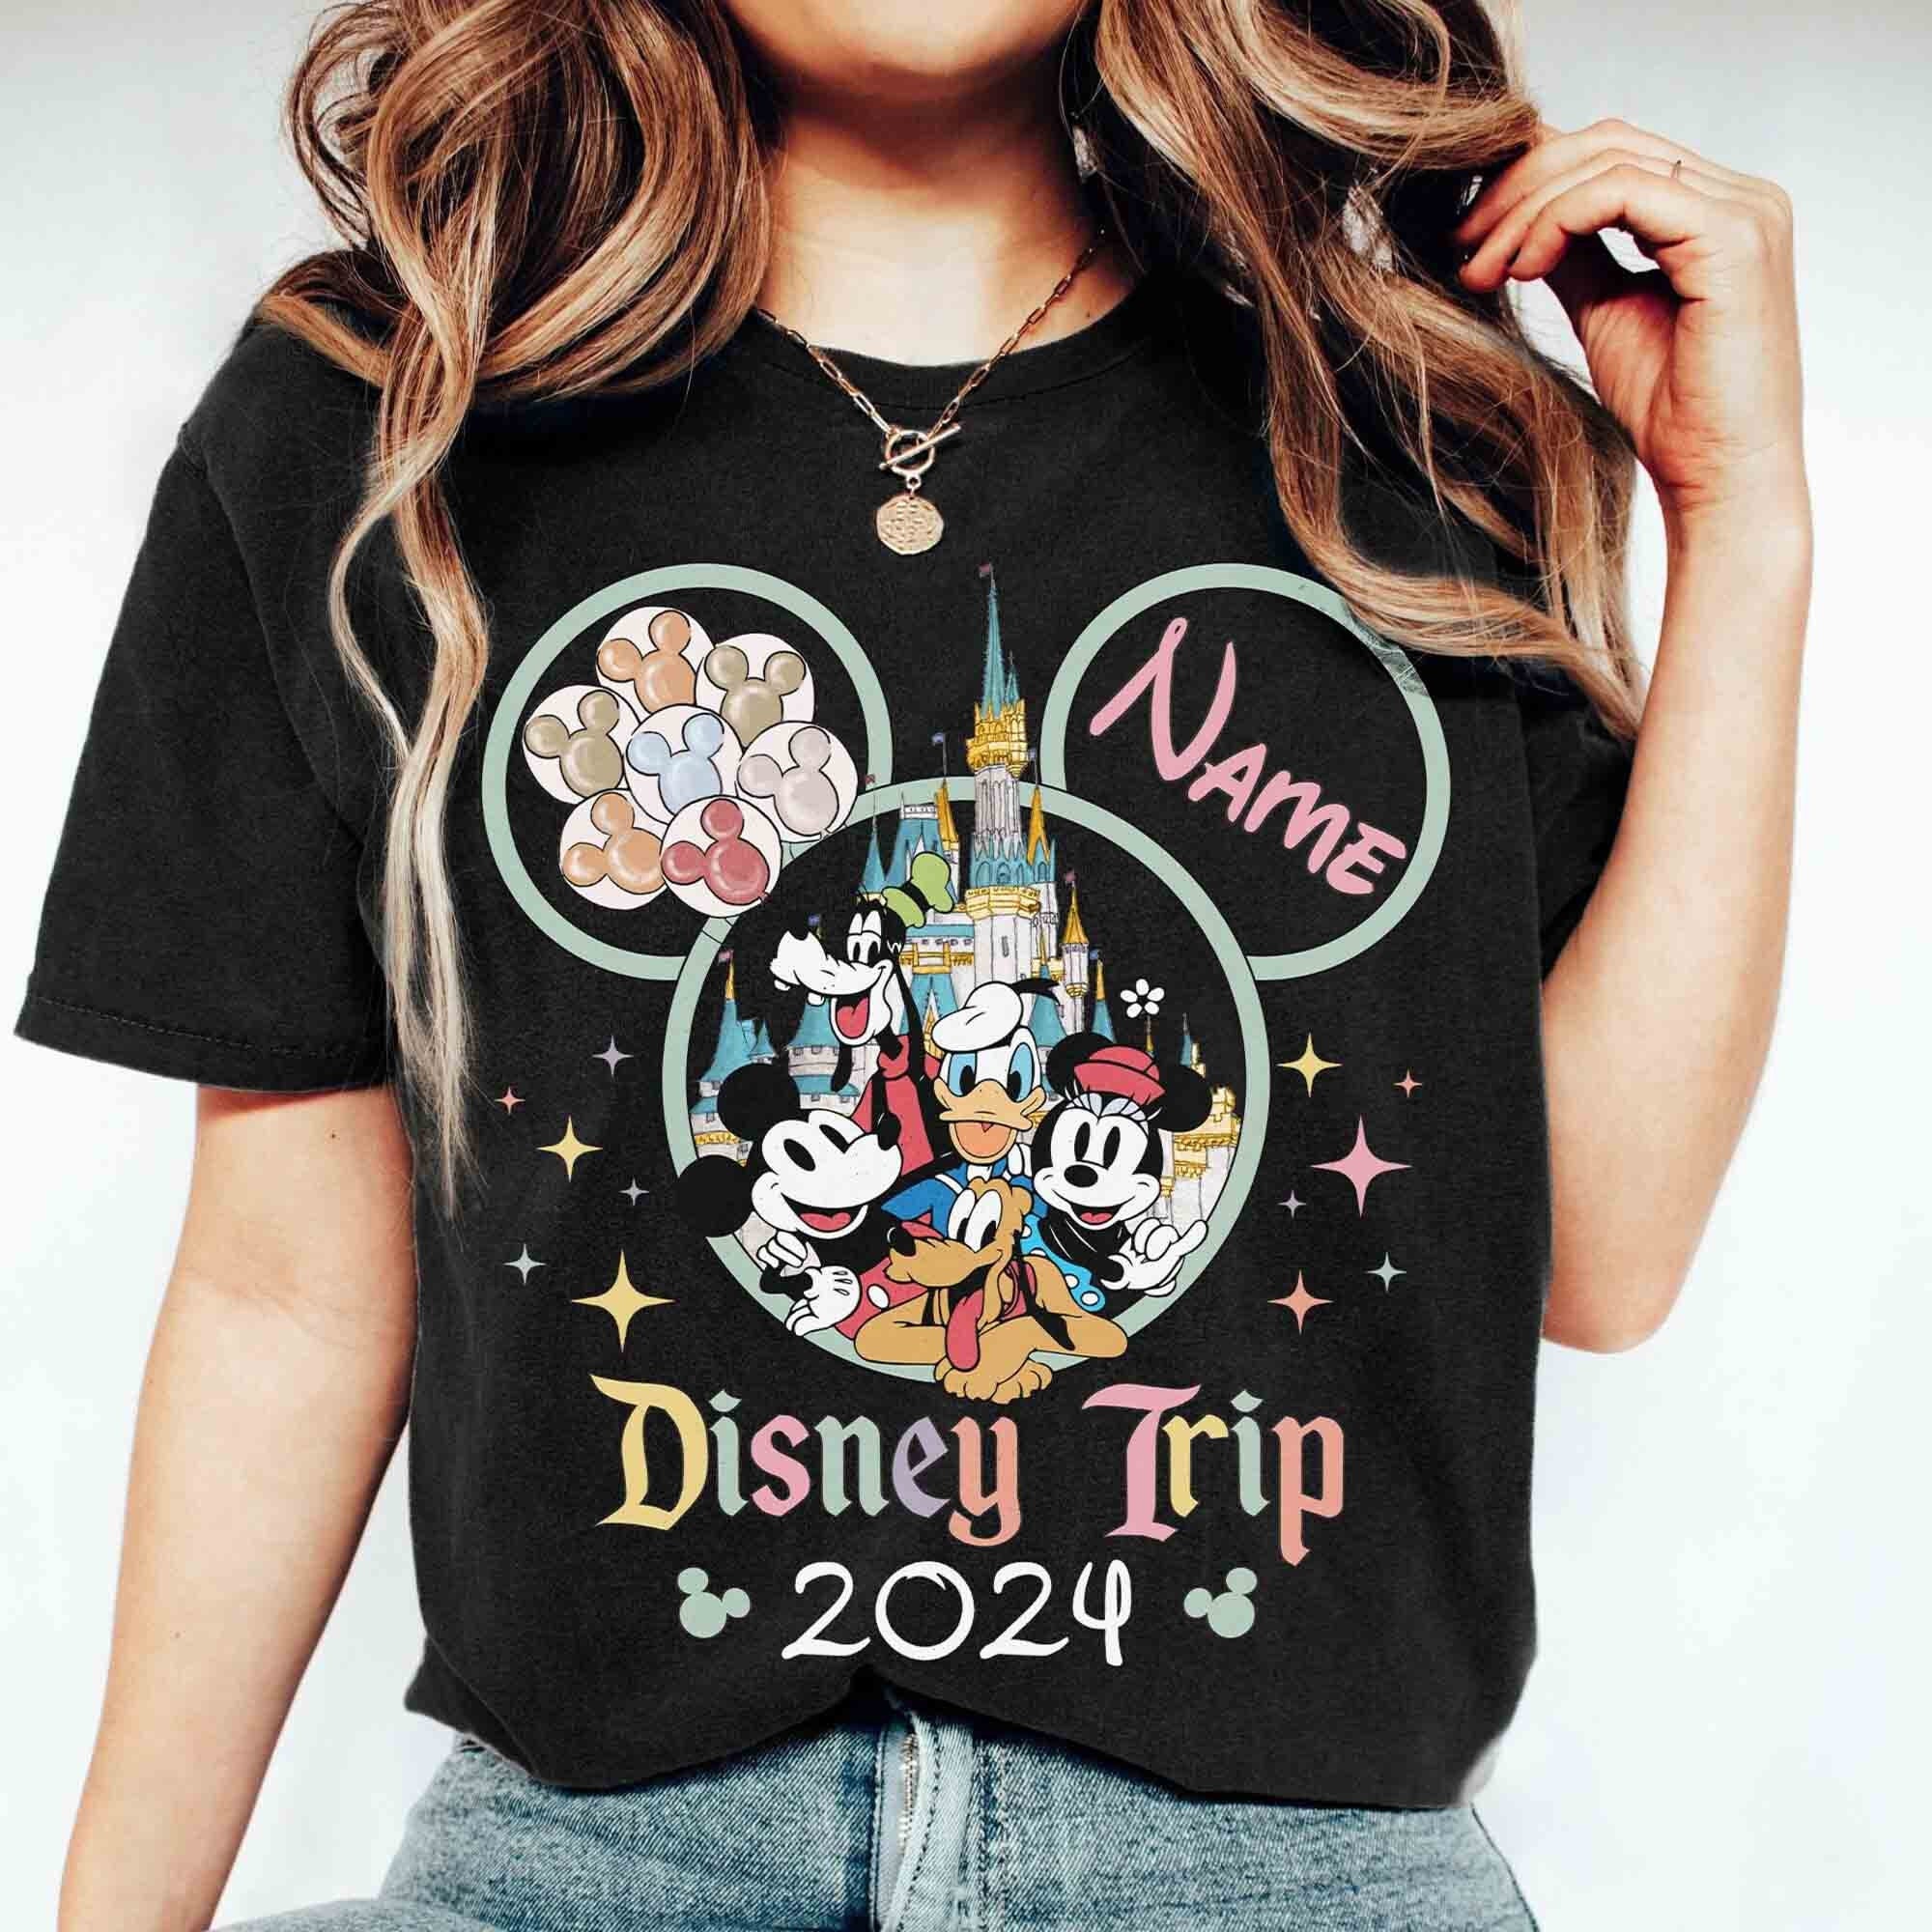 Discover Personalized Disney Family Trip 2024 Shirt, Vacation Disney Matching Shirts, First Disney Trip 2024 Shirt, Disneyworld 2024 Family T-Shirt